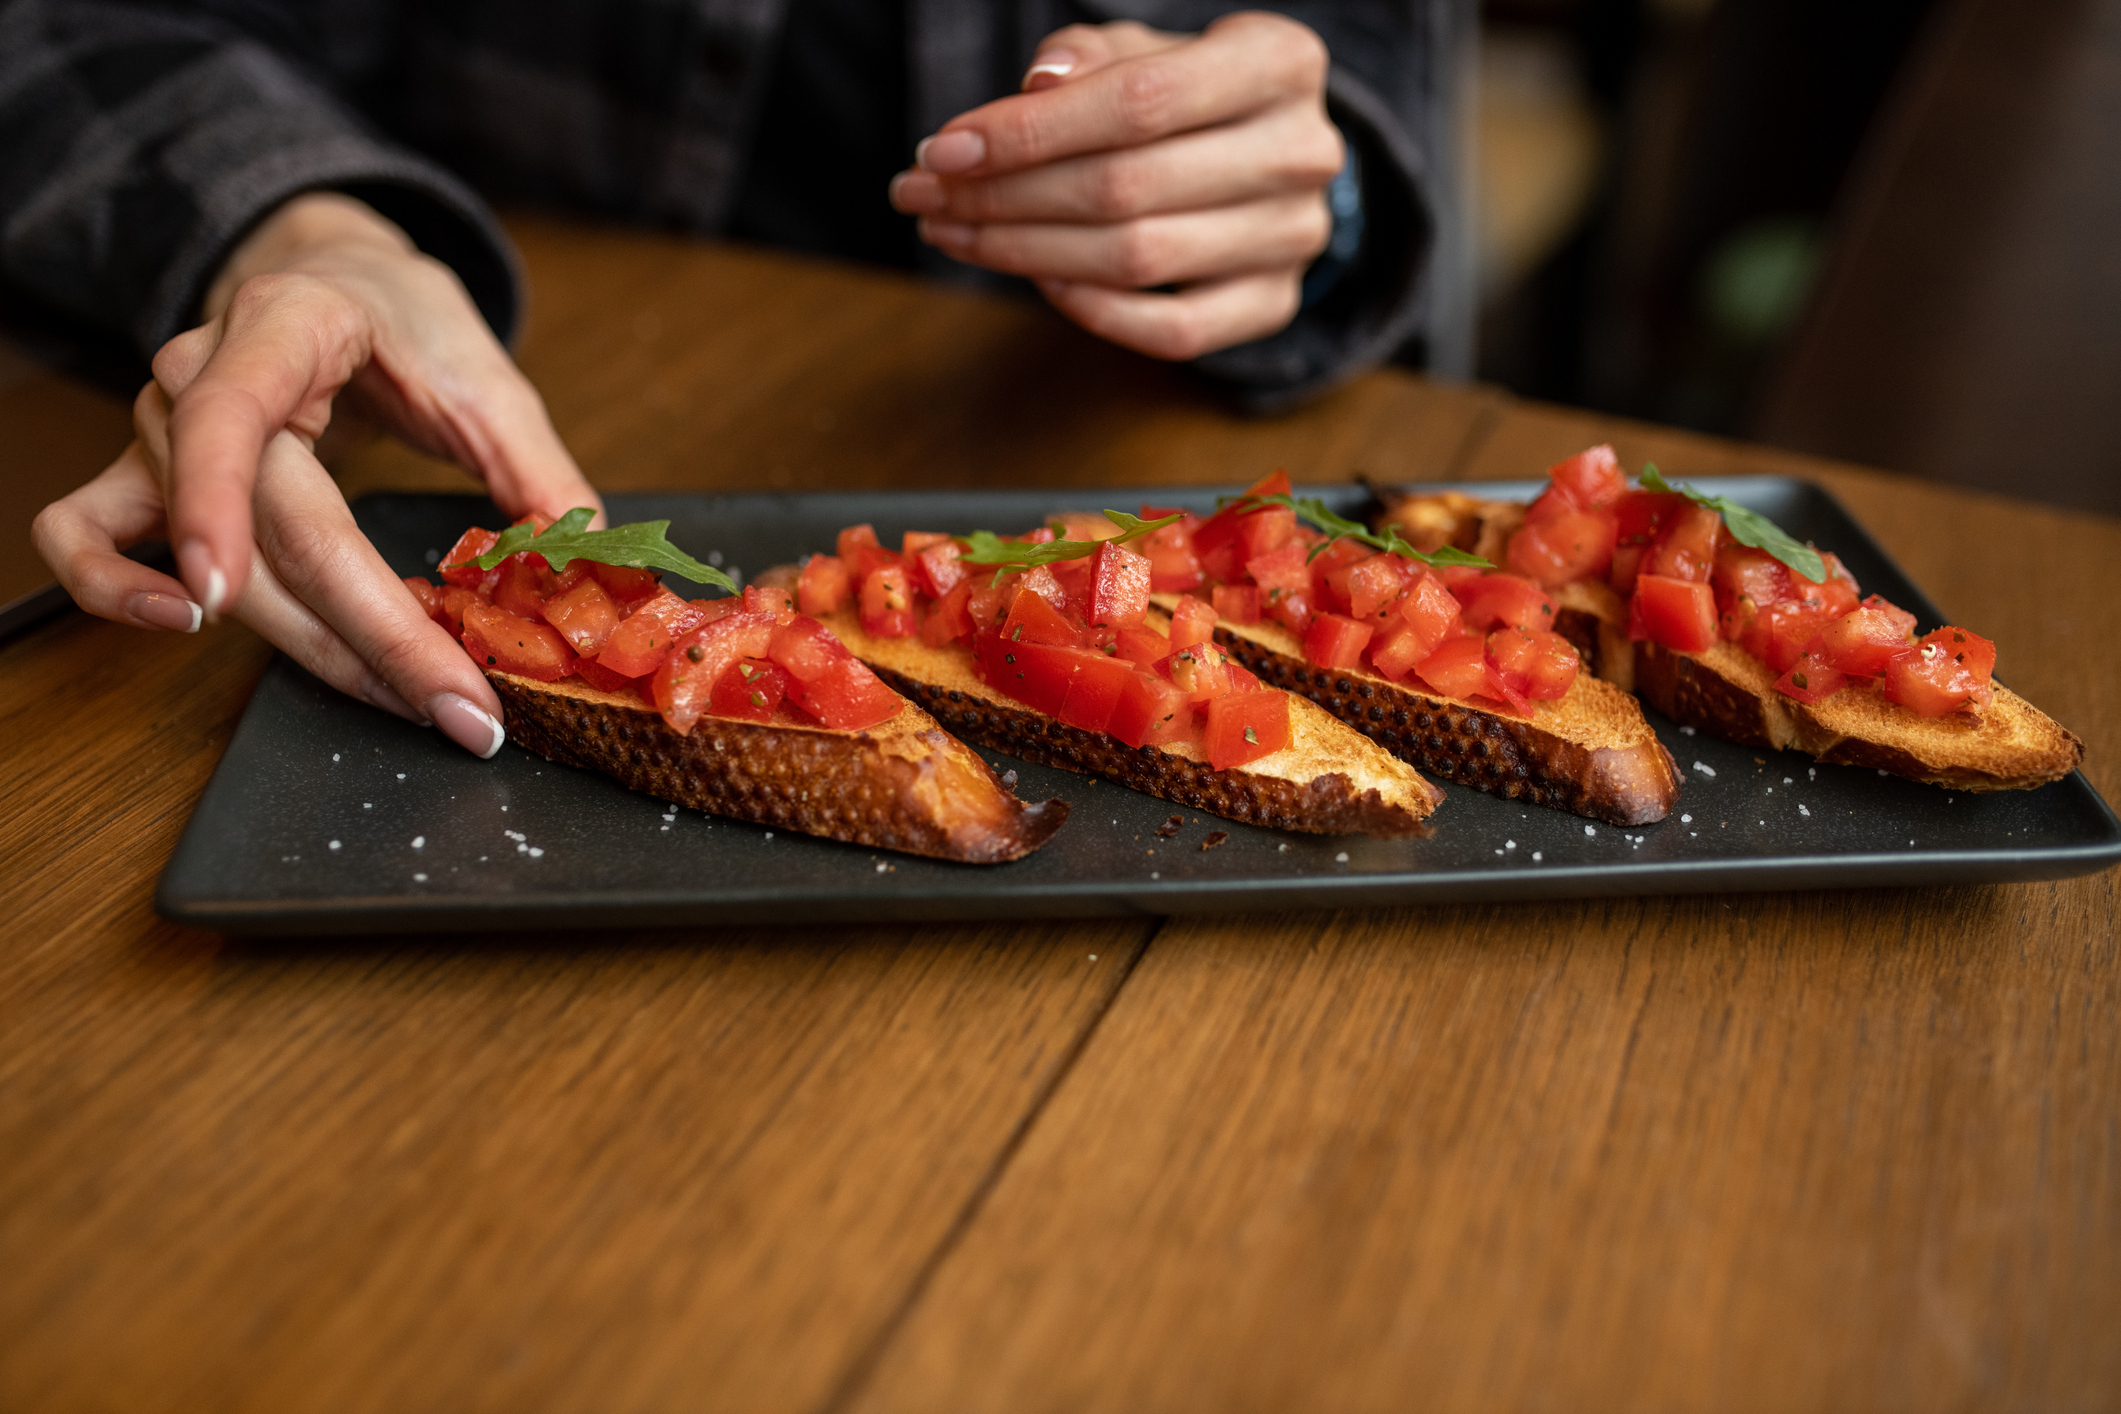 Person reaches for a slice of bruschetta on a platter, hands visible but not faces